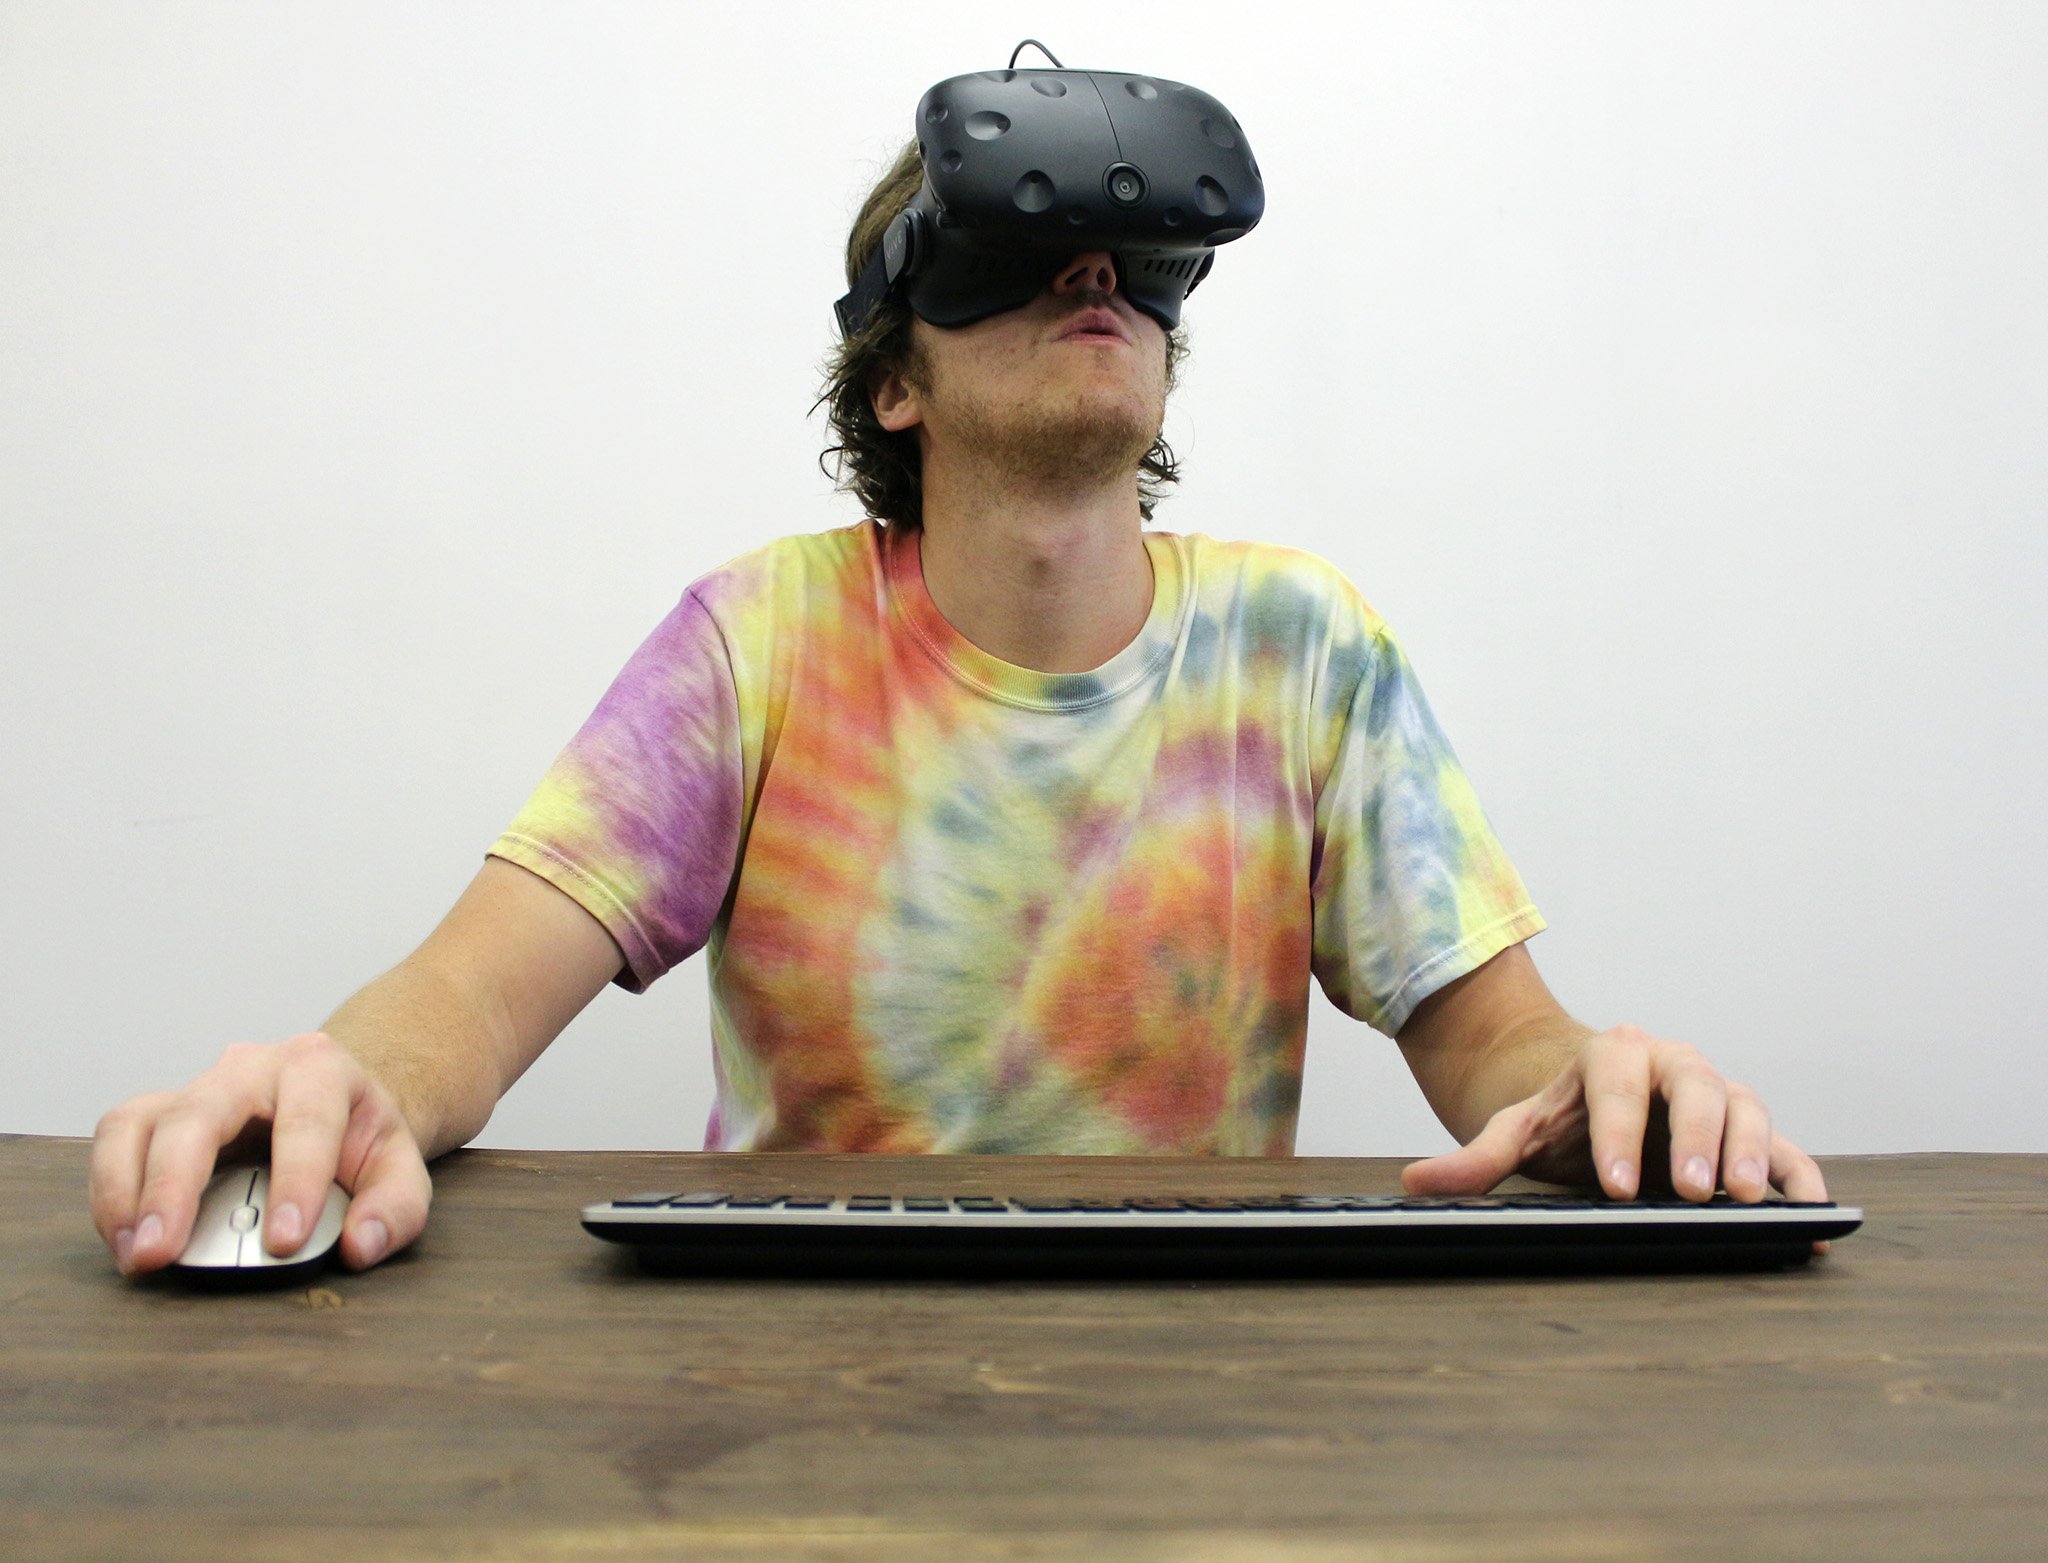 How to use your keyboard while wearing a VR headset